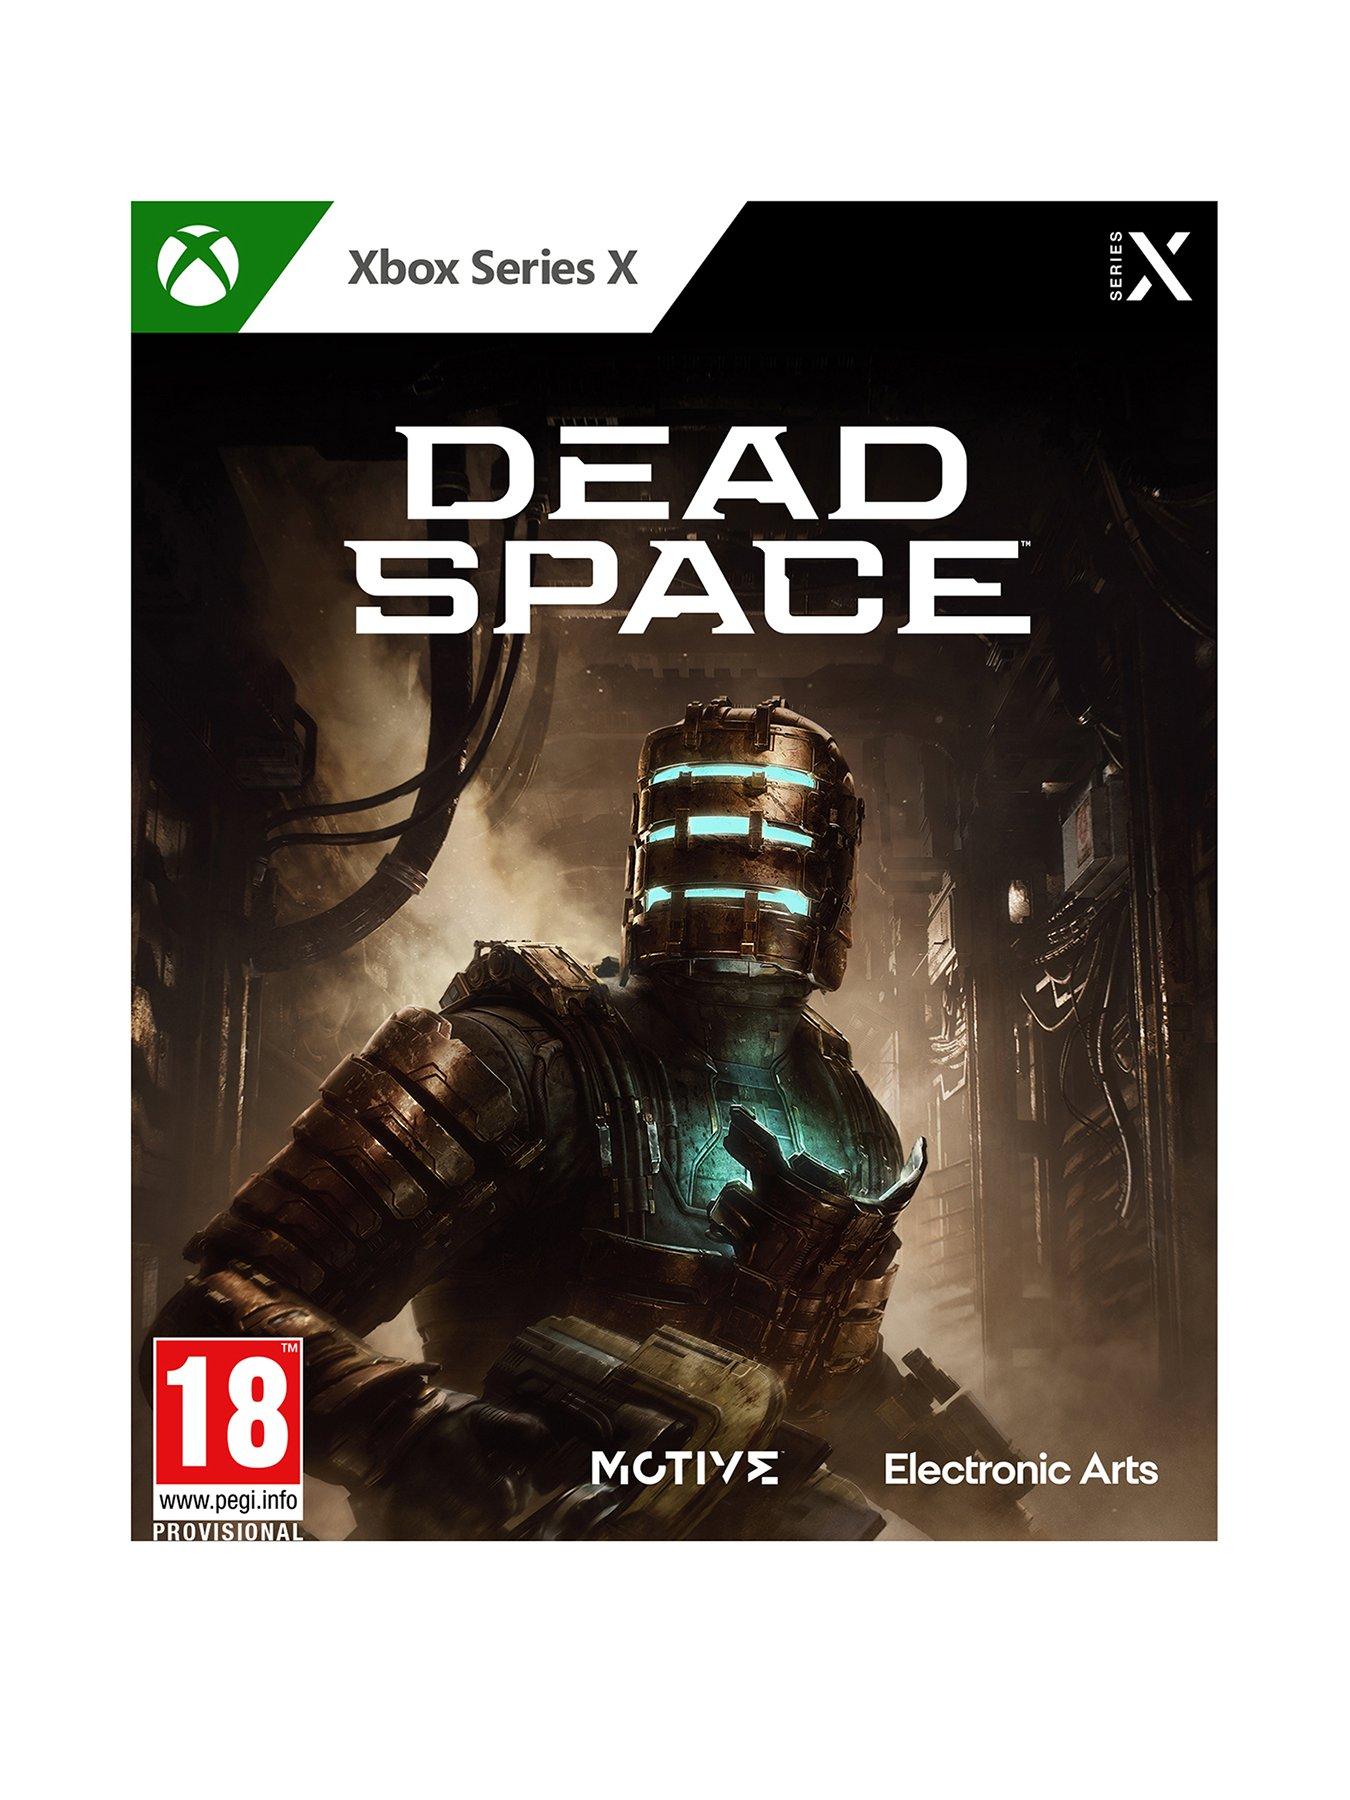 Dead Space 2 Xbox Series X HDR Auto Mode 4K Horror Gameplay Chapter 1 